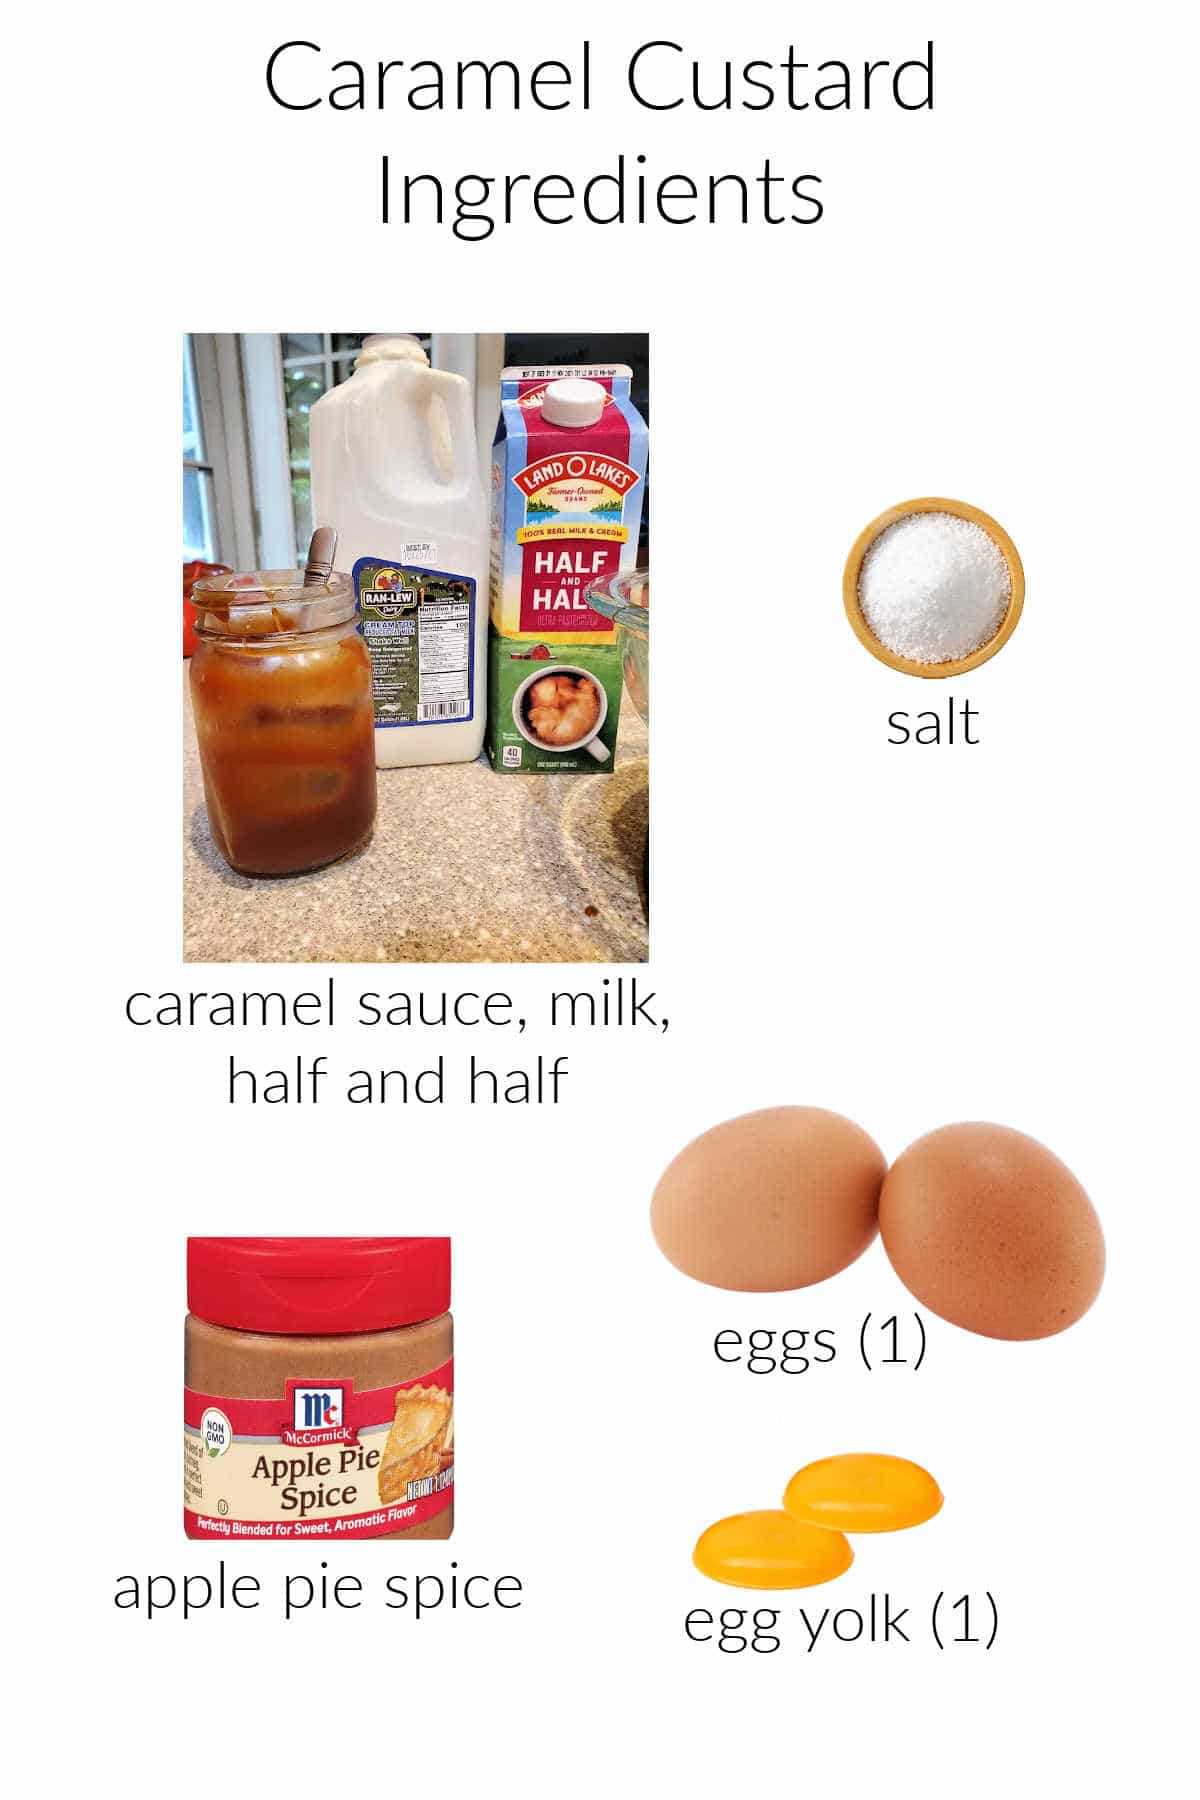 A collage of photos of the ingredients for making caramel custard: caramel sauce, milk, half and half, salt, applep ie spice, egg, and egg yolk.